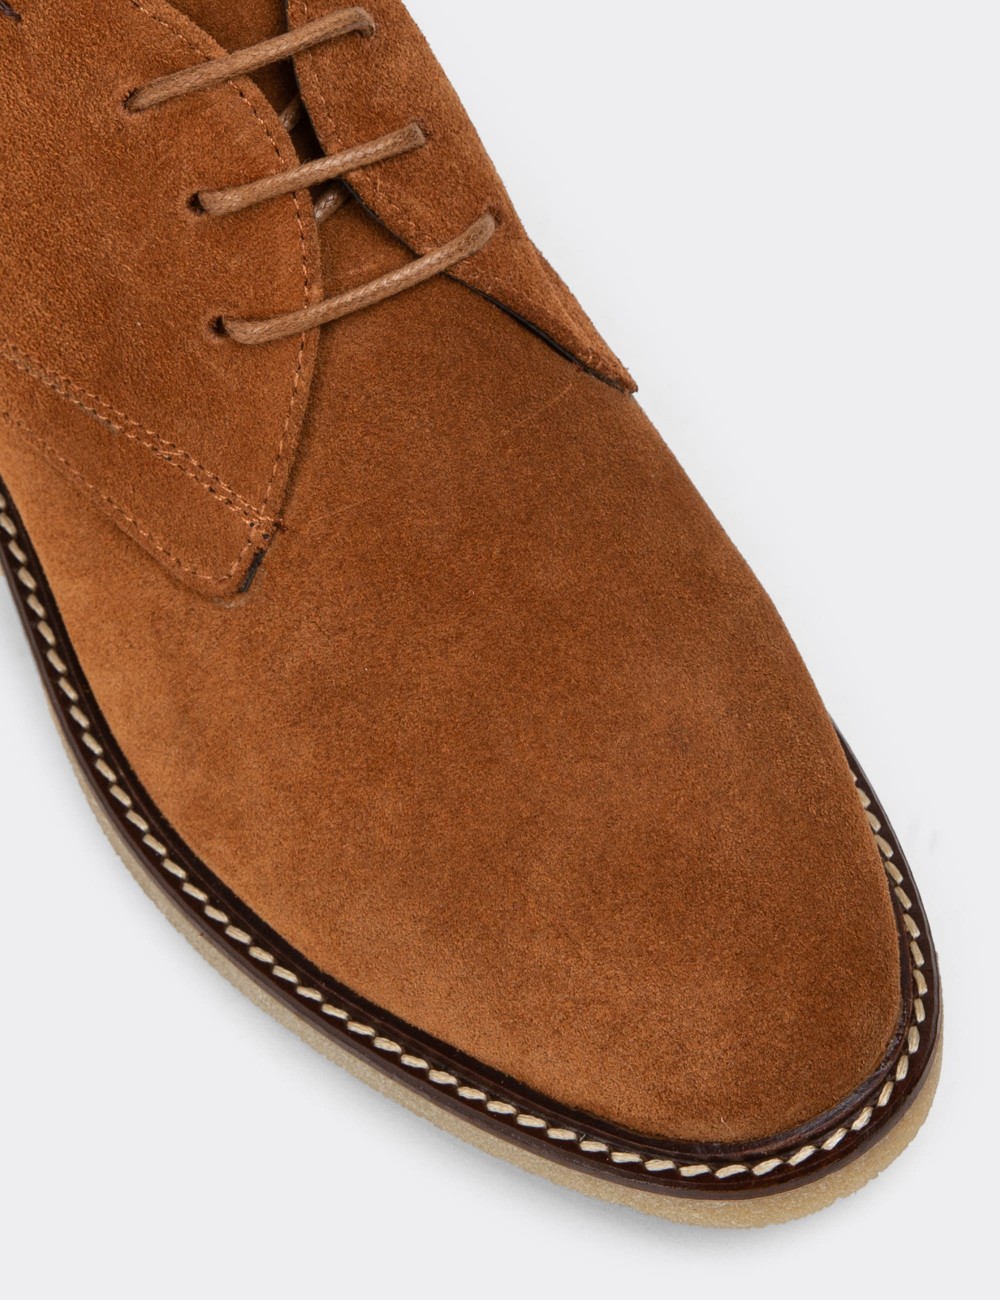 Tan Suede Leather Desert Boots - 01967ZTBAC01